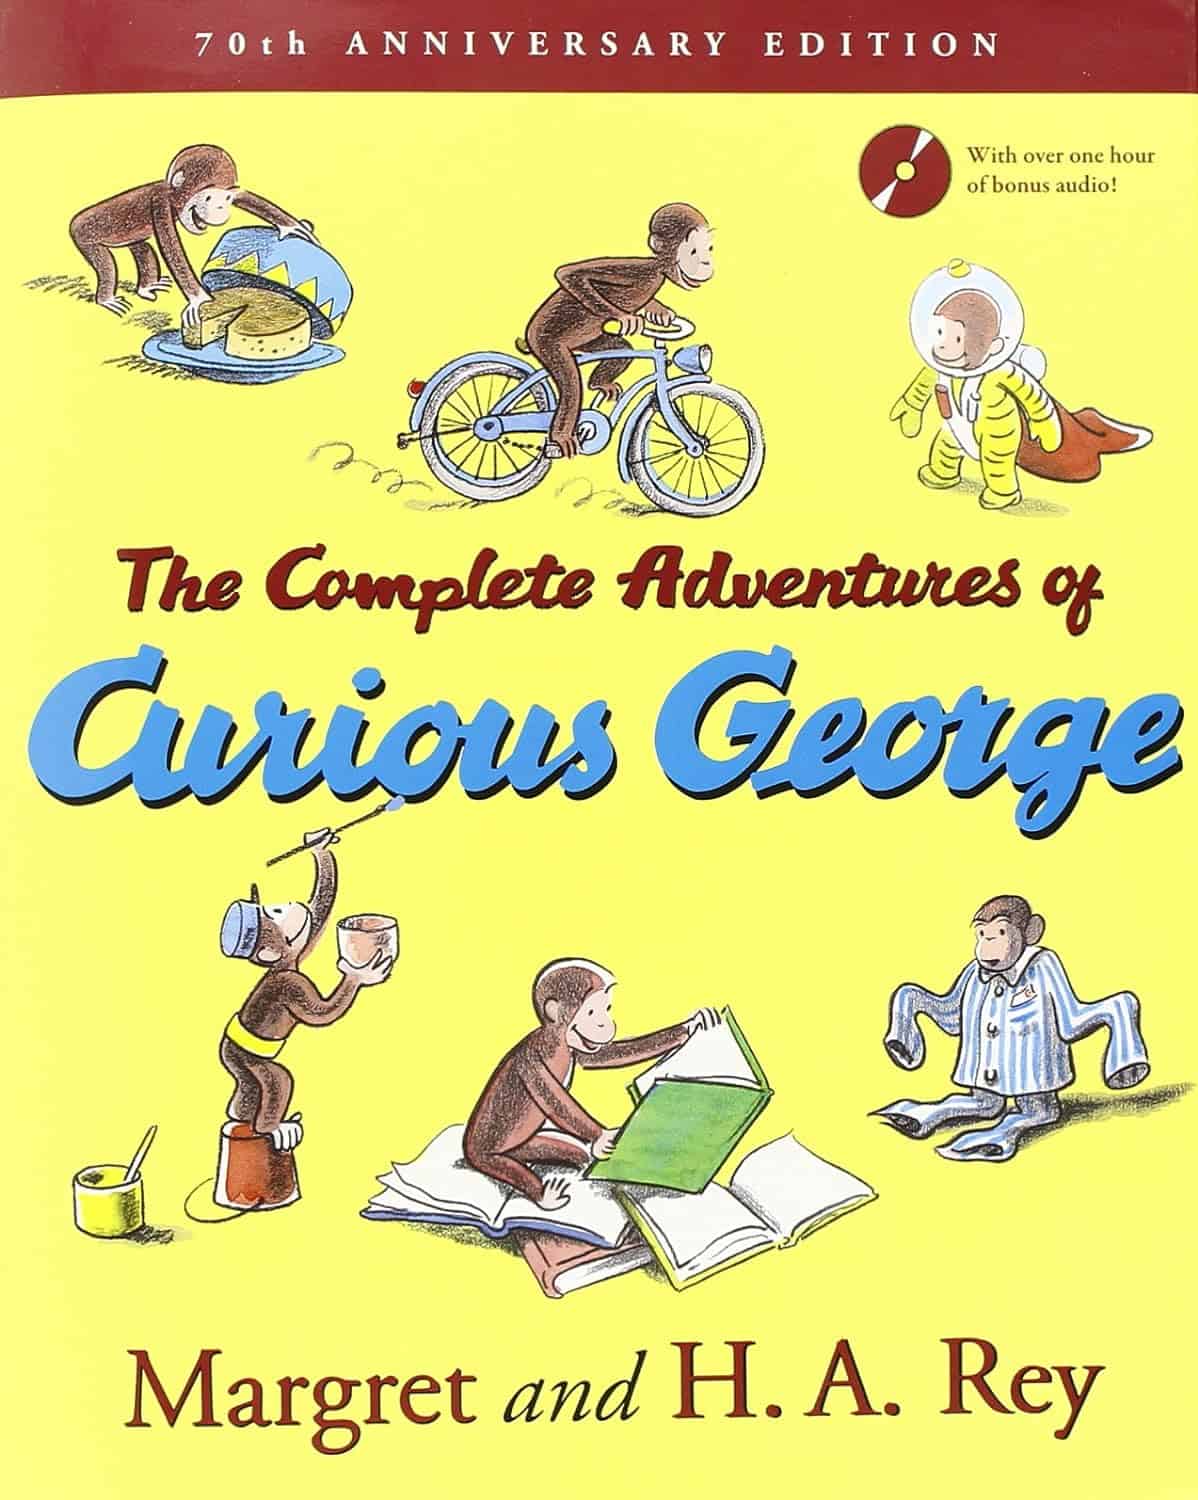 The Complete Adventures of Curious George by Margret and H.A. Rey